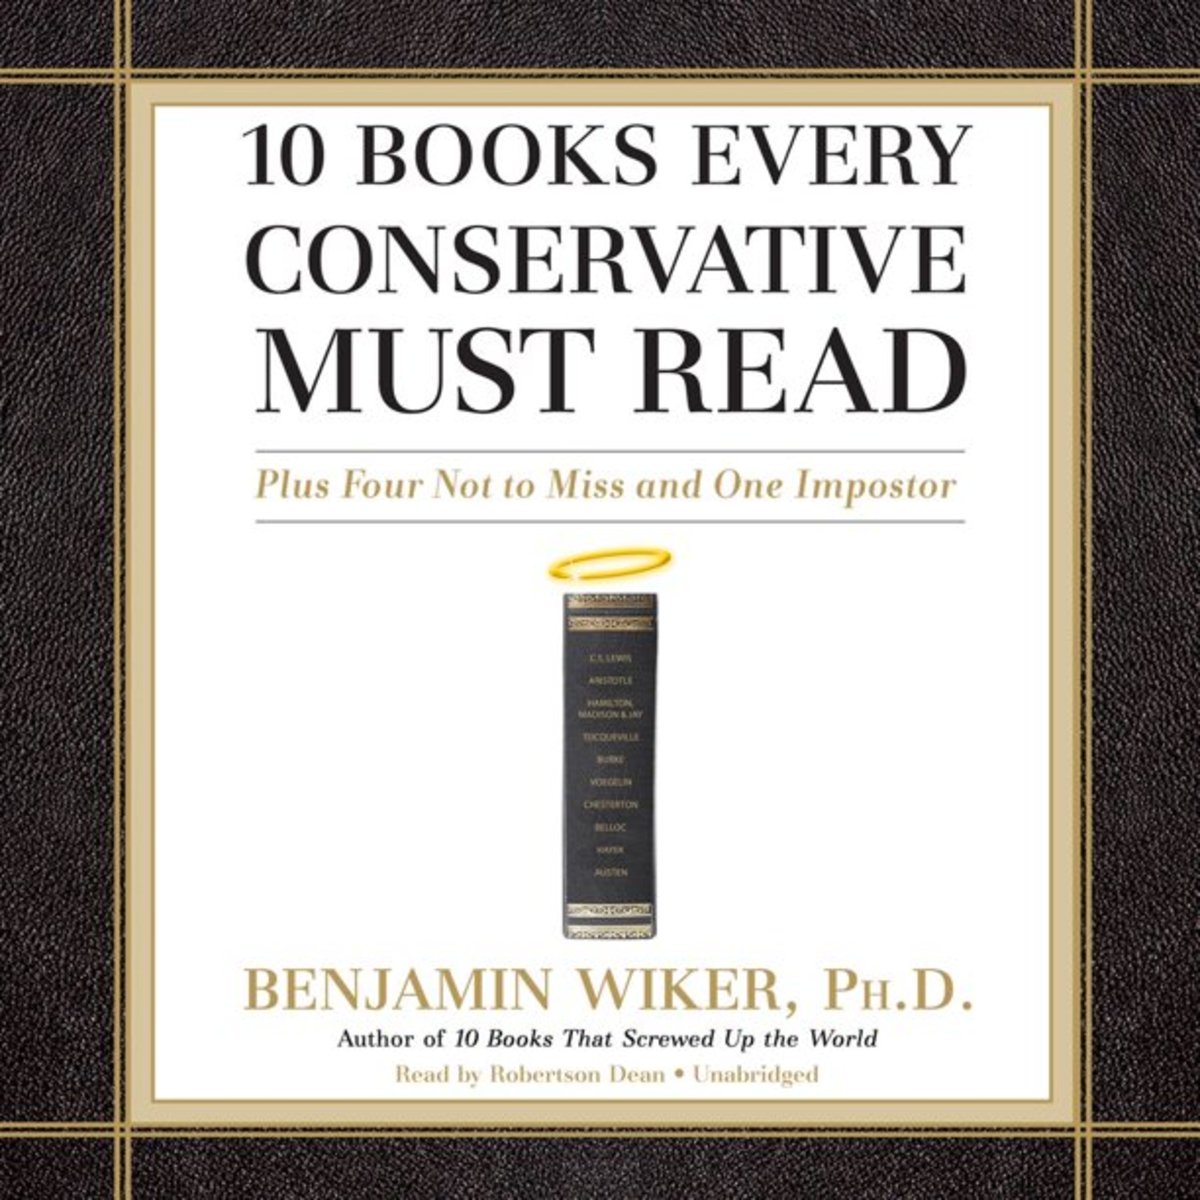 10-books-every-conservative-must-read-by-benjamin-wiker-a-synopsis